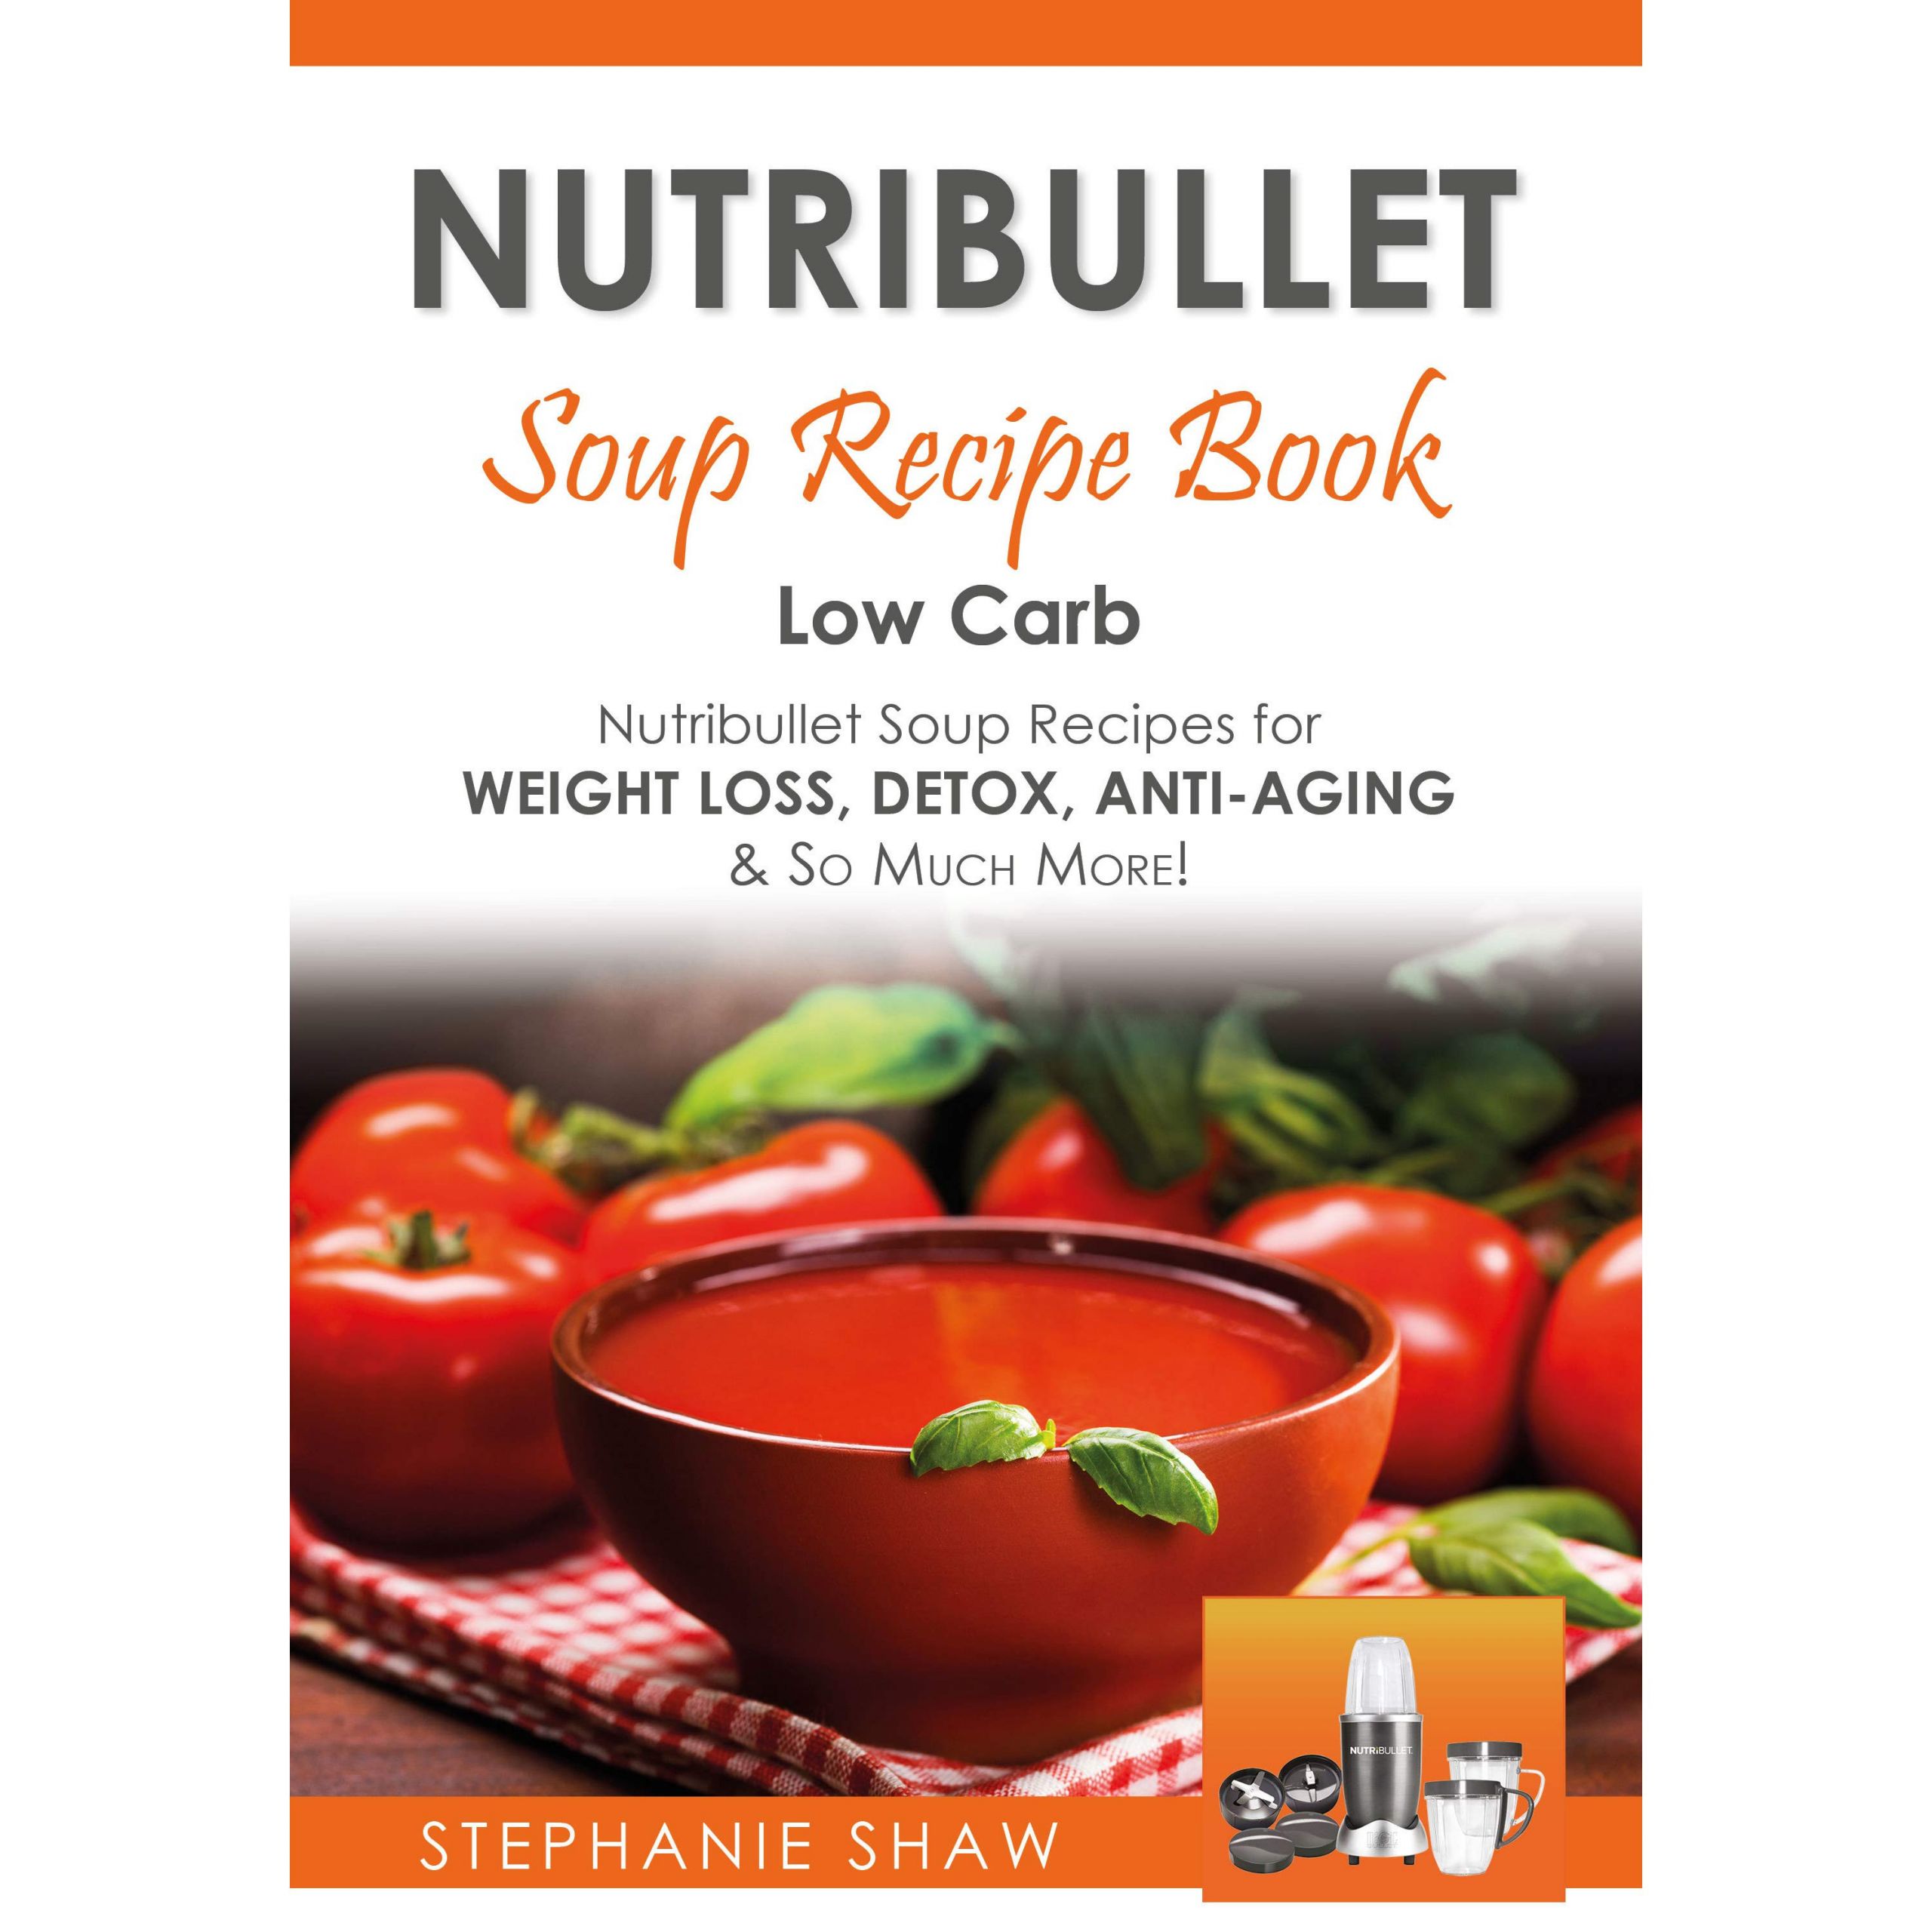 Nutribullet Recipes For Weight Loss
 Book giveaway for Nutribullet Soup Recipe Book Low Carb